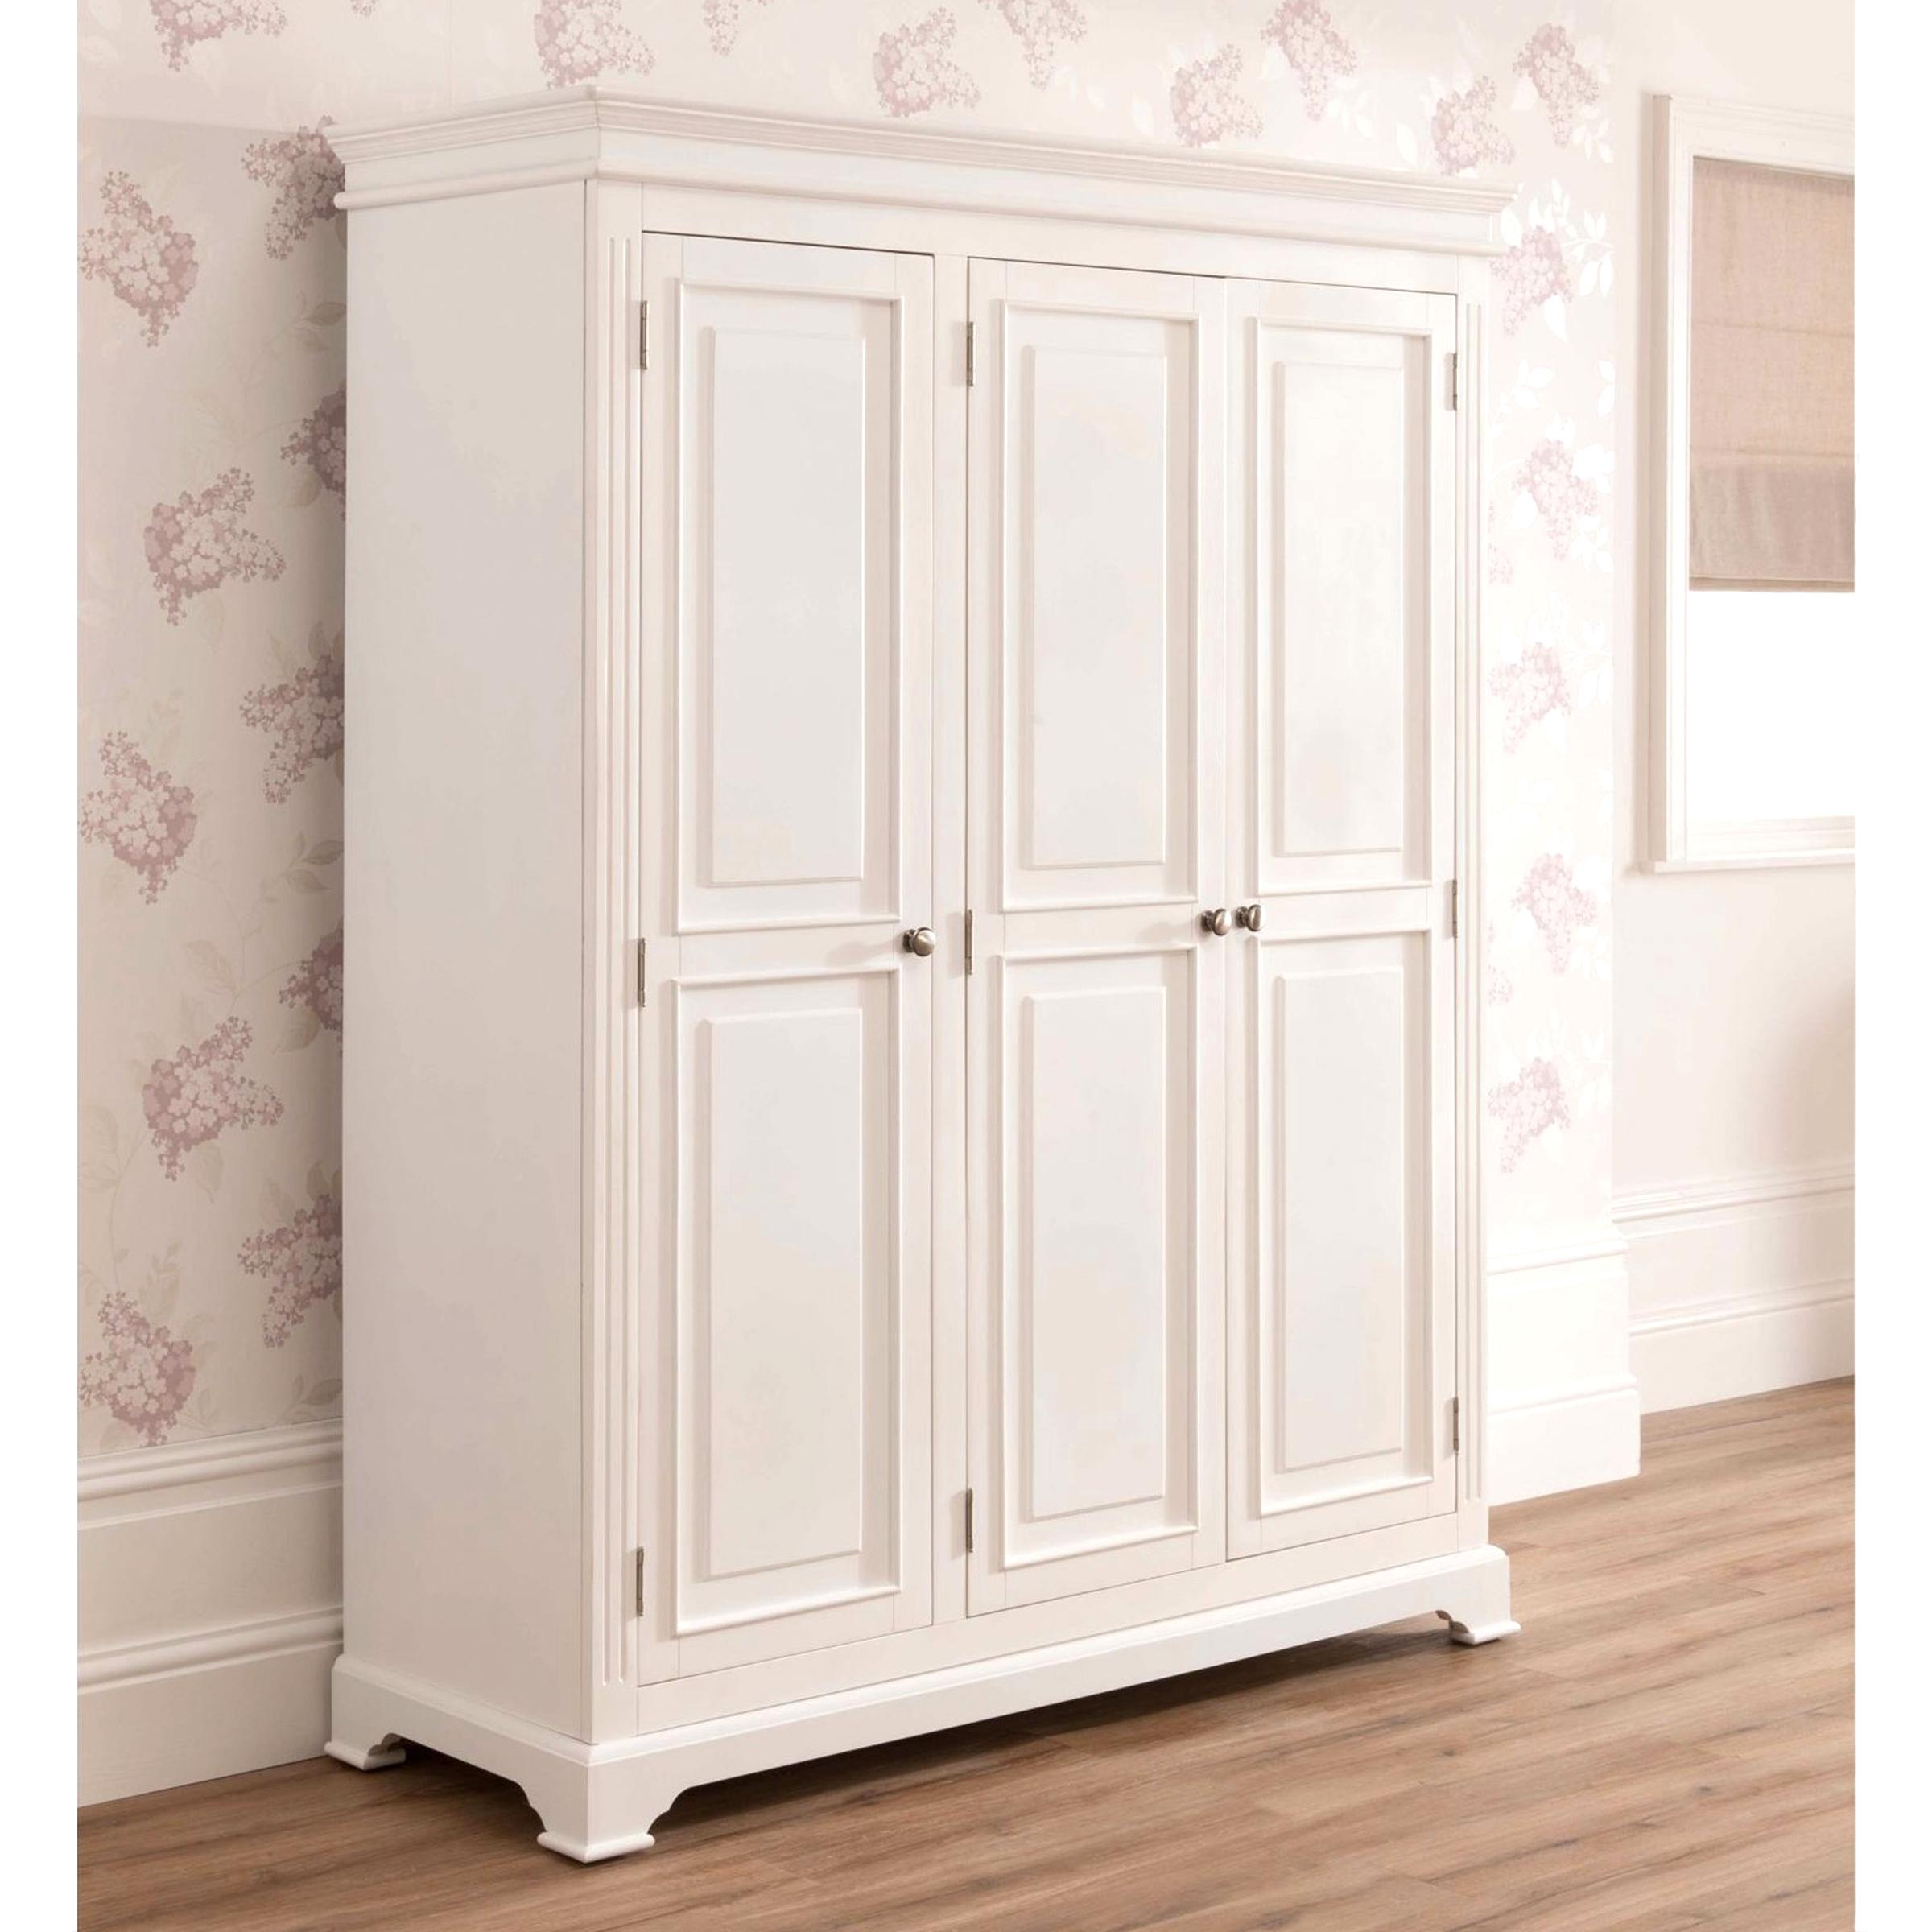  Shabby Chic Wardrobe  for sale in UK View 46 bargains